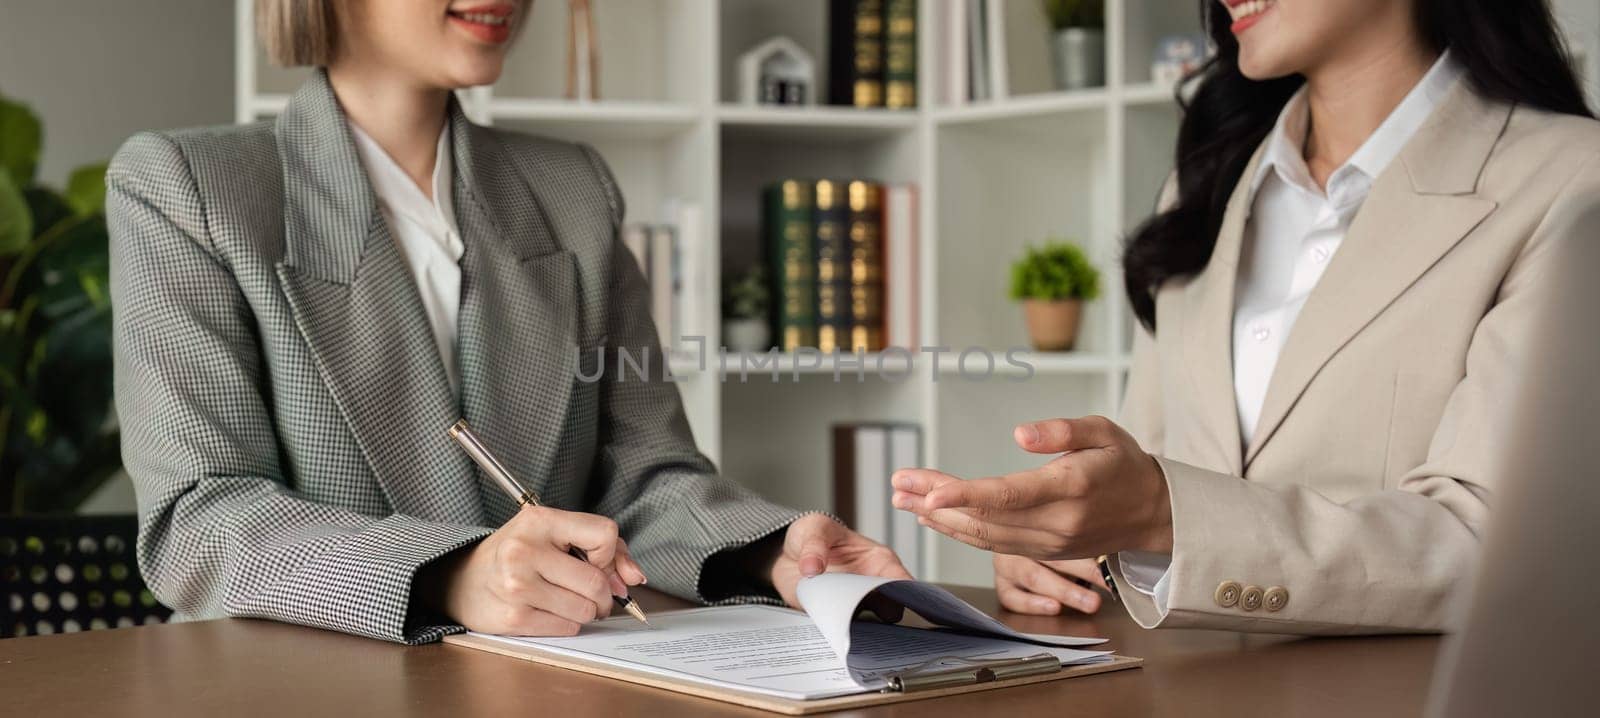 Lawyer and businesswomen discussing and introducing Providing legal advice regarding signing insurance contracts or financial contracts by wichayada